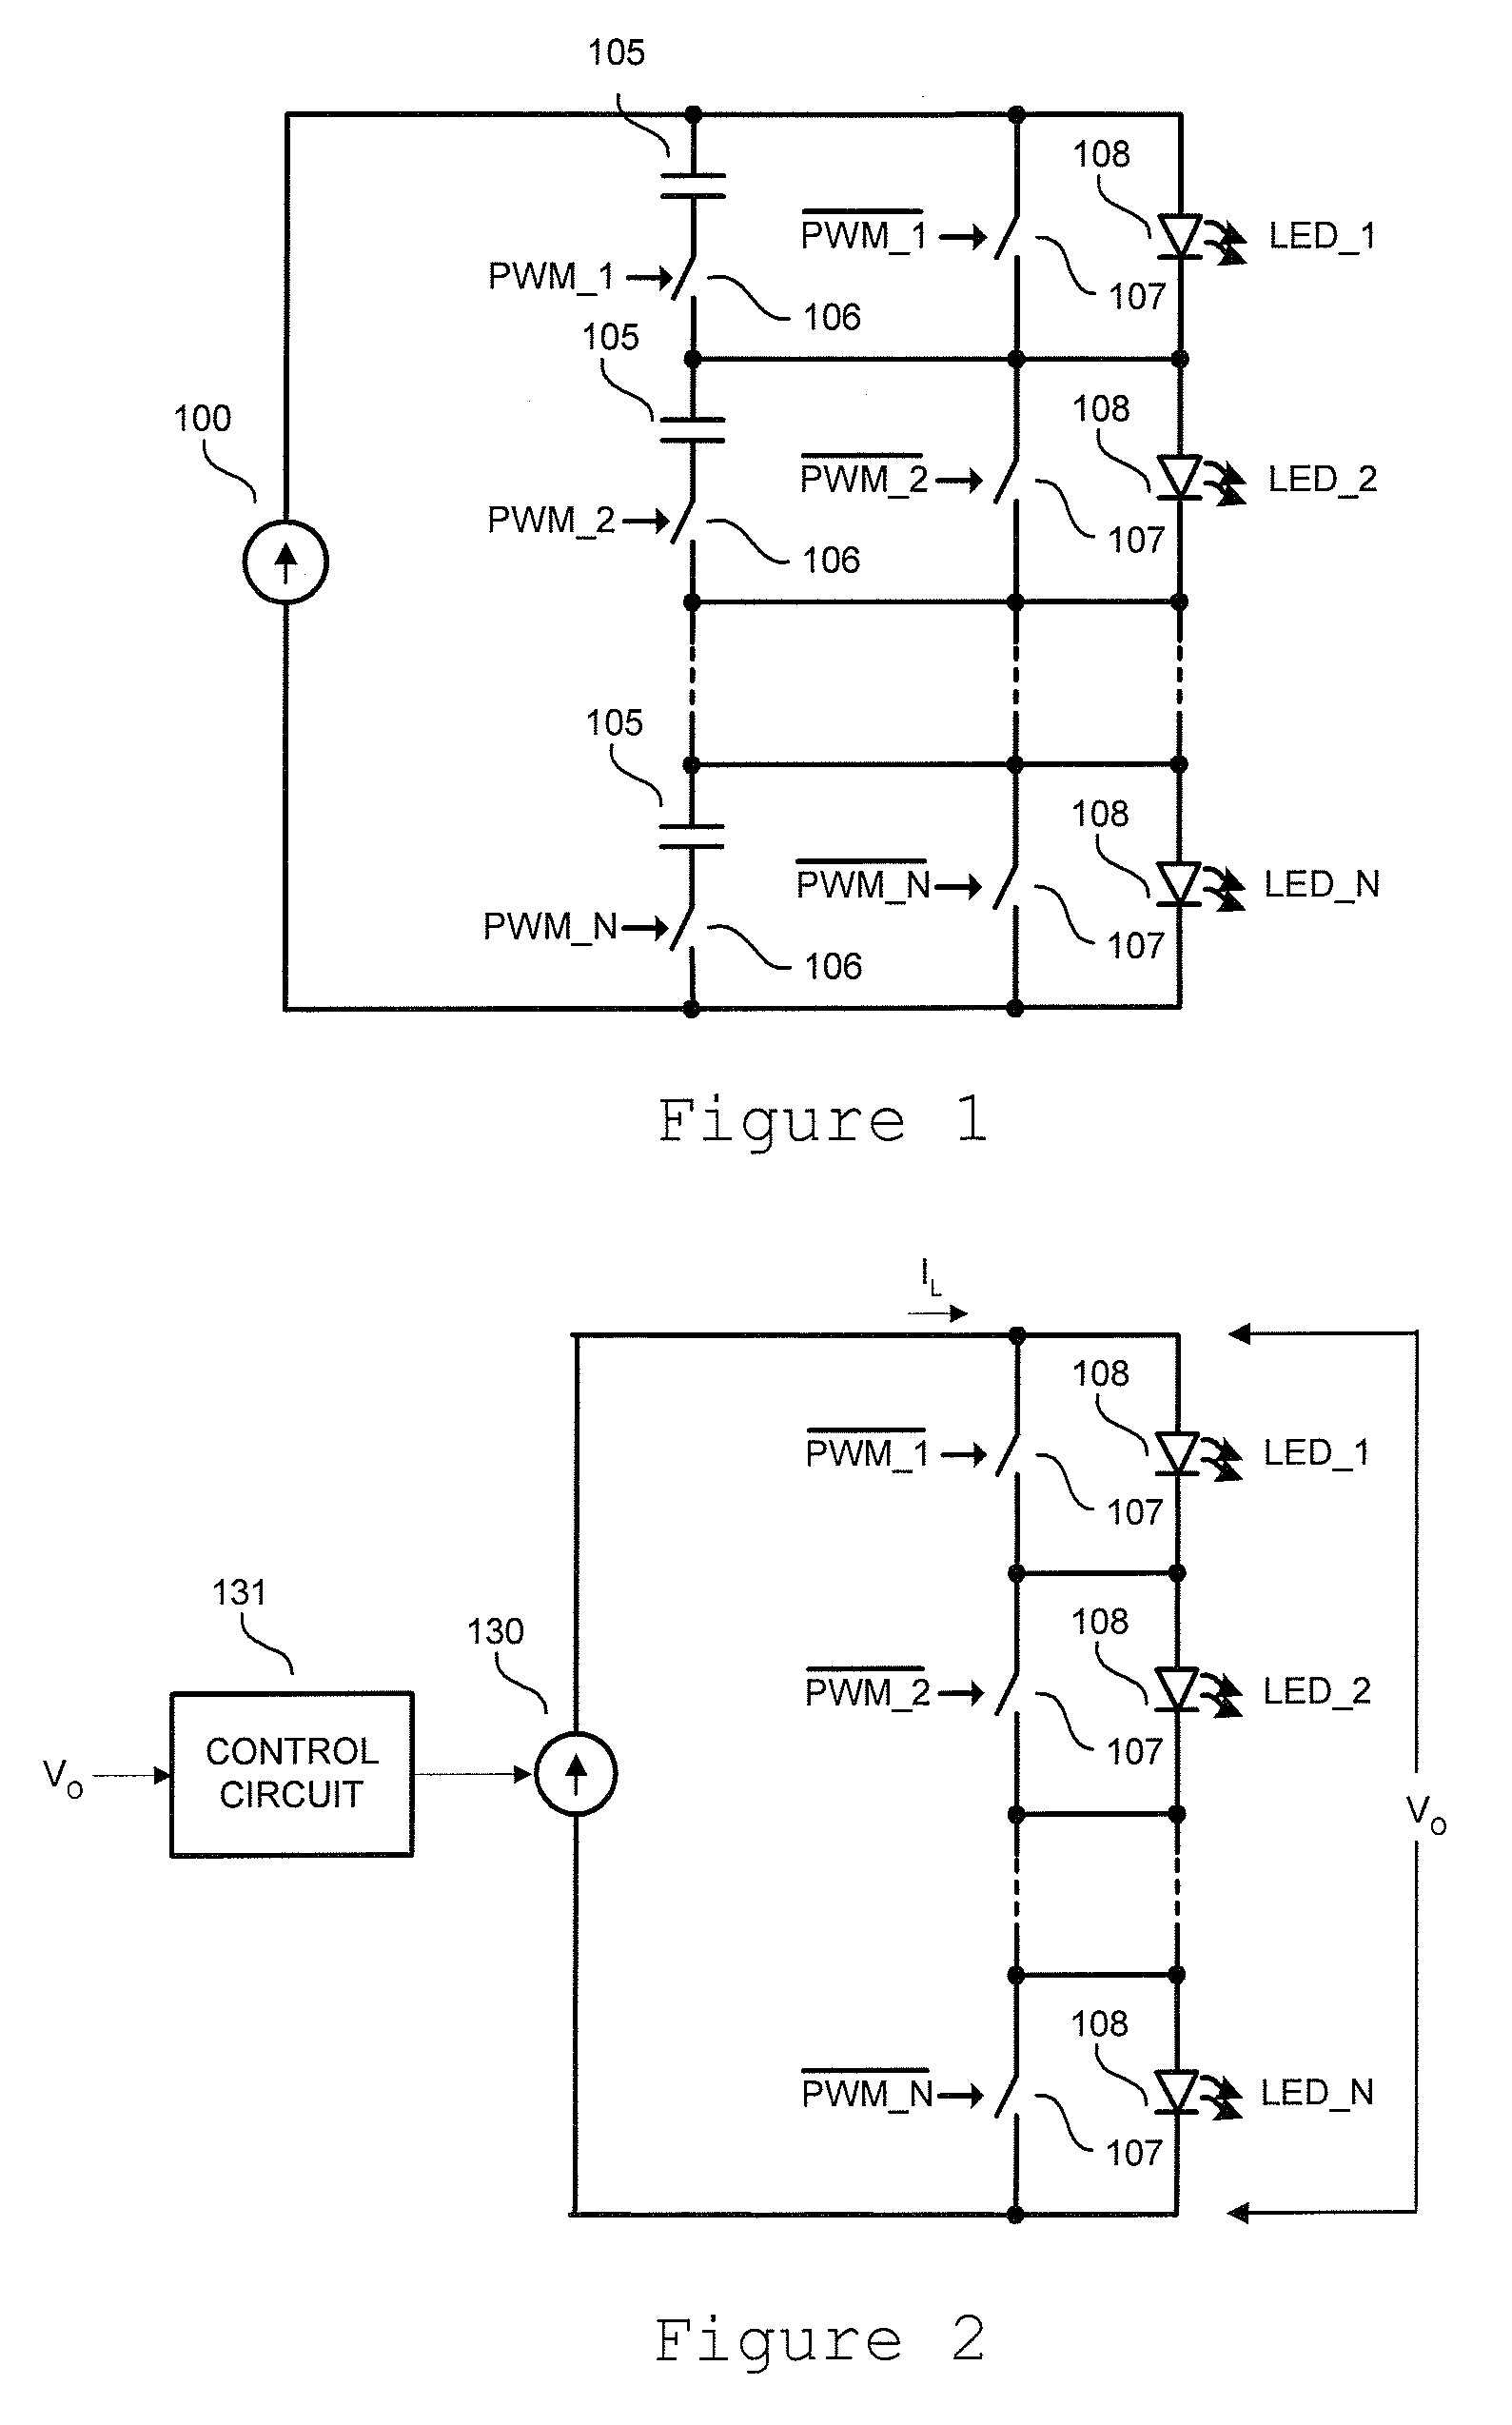 Shunting type pwm dimming circuit for individually controlling brightness of series connected leds operated at constant current and method therefor